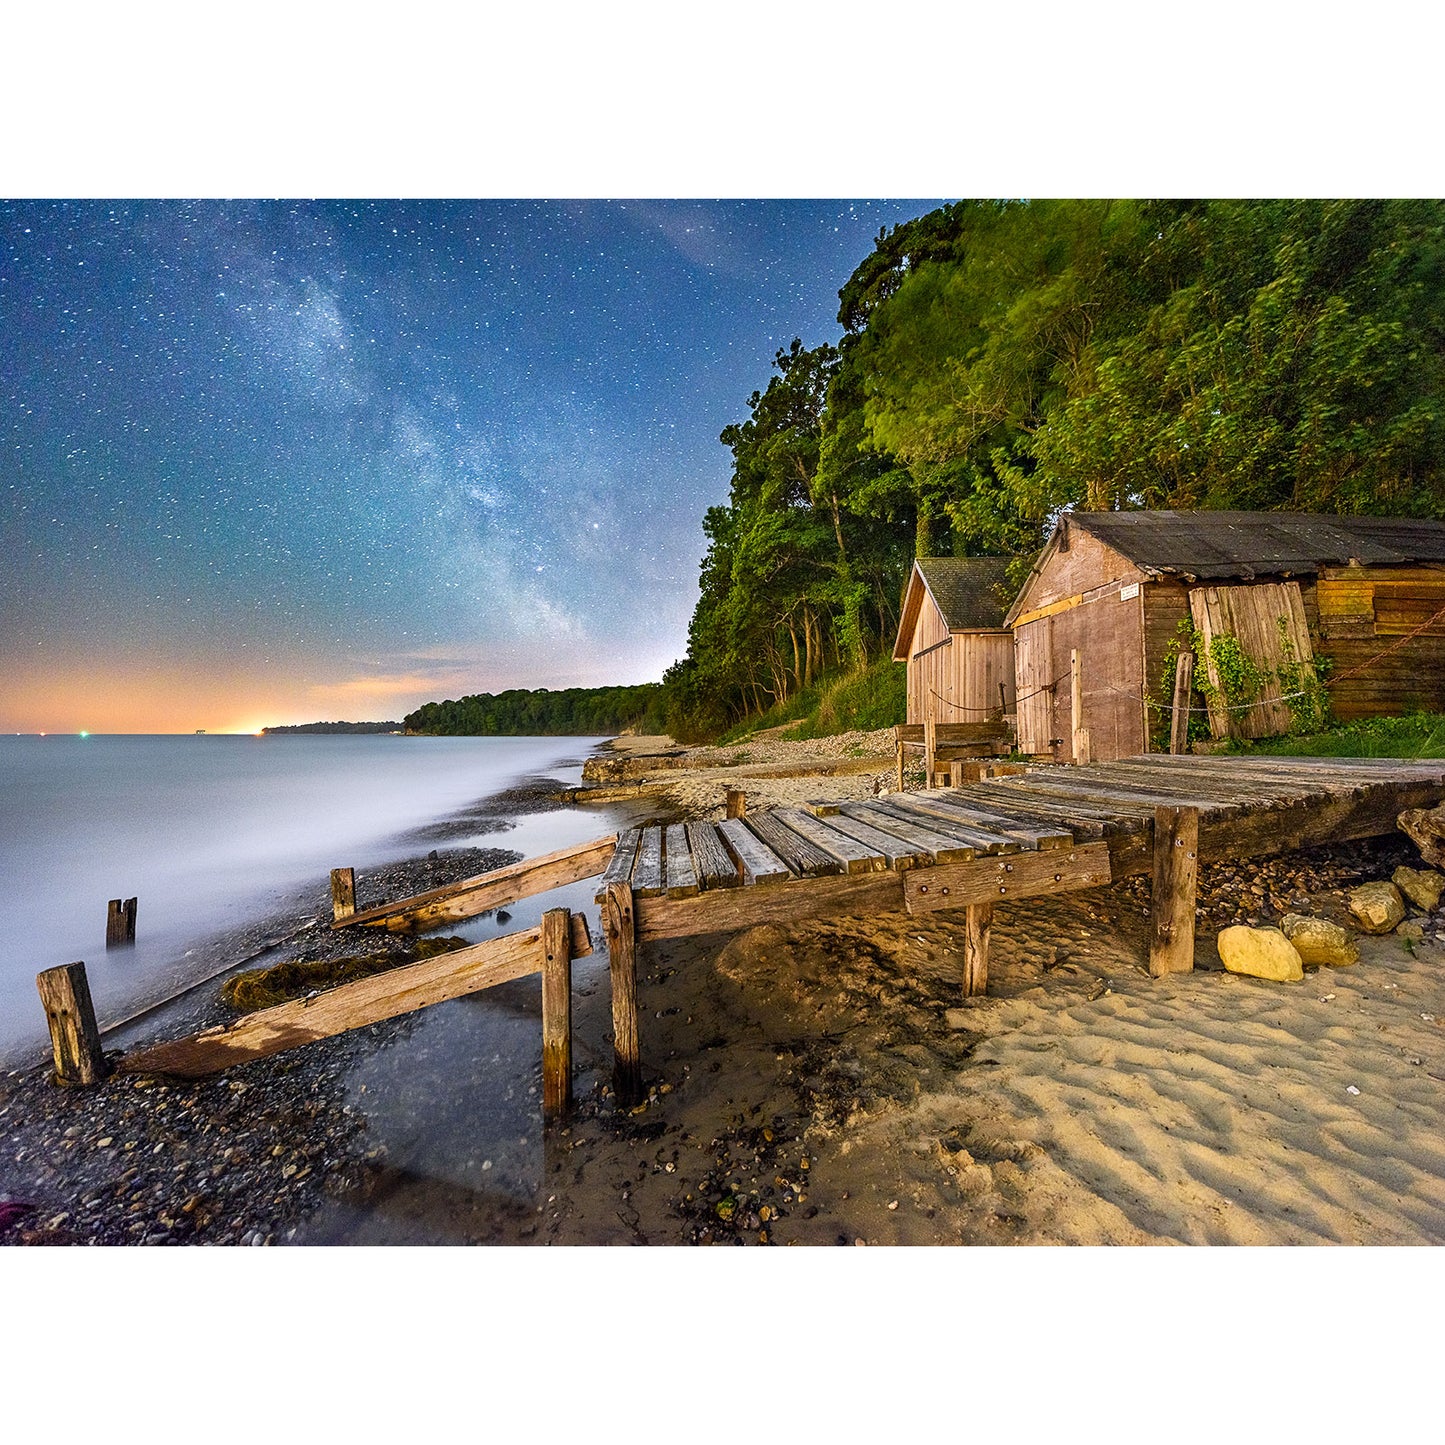 Milky Way, Priory Bay - Available Light Photography